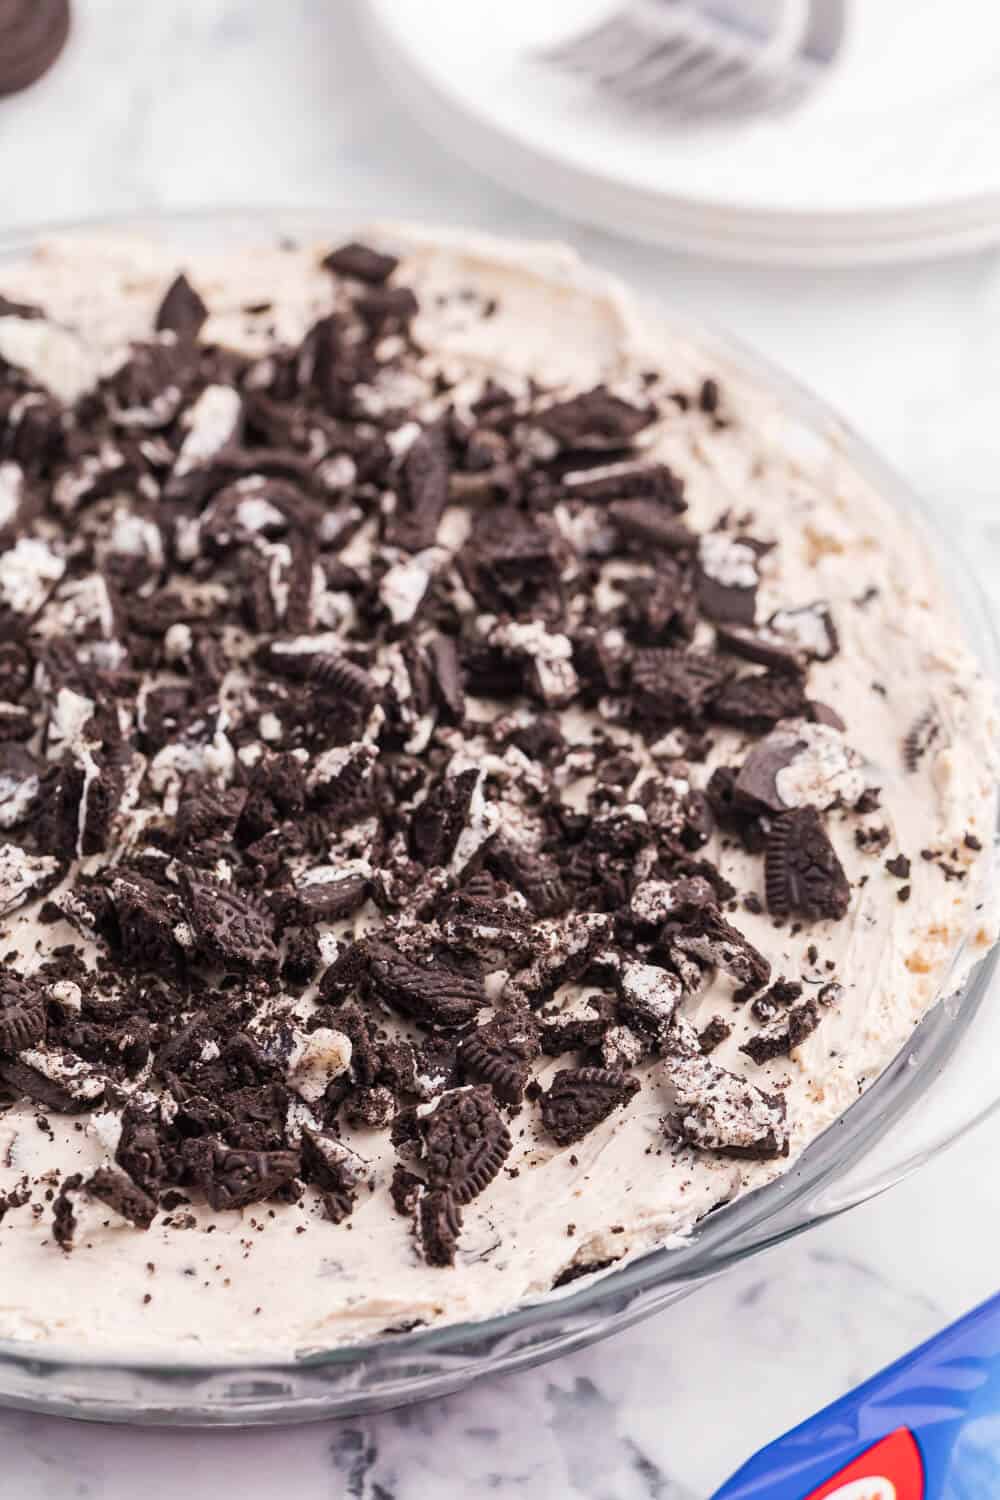 Oreo Pie Recipe - This easy no-bake pie recipe has a chocolate Oreo crust and creamy sweet filling made with Cool Whip, Oreos and cream cheese. You'll love the cookies and cream taste in very bite!